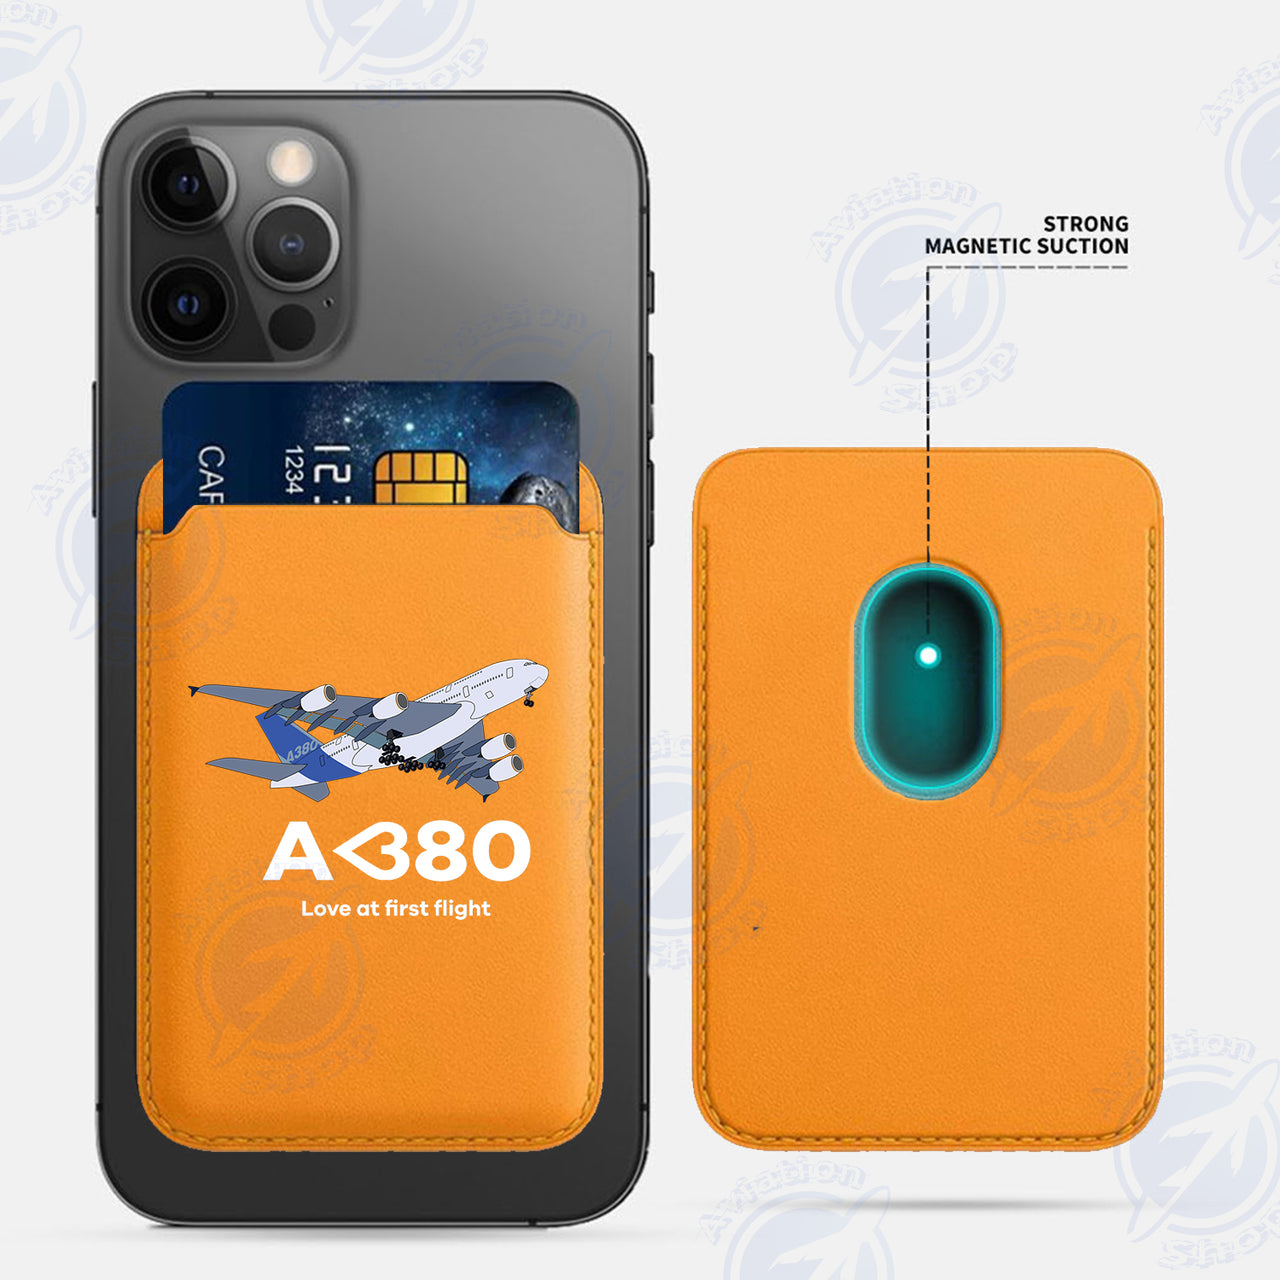 Airbus A380 Love at first flight iPhone Cases Magnetic Card Wallet